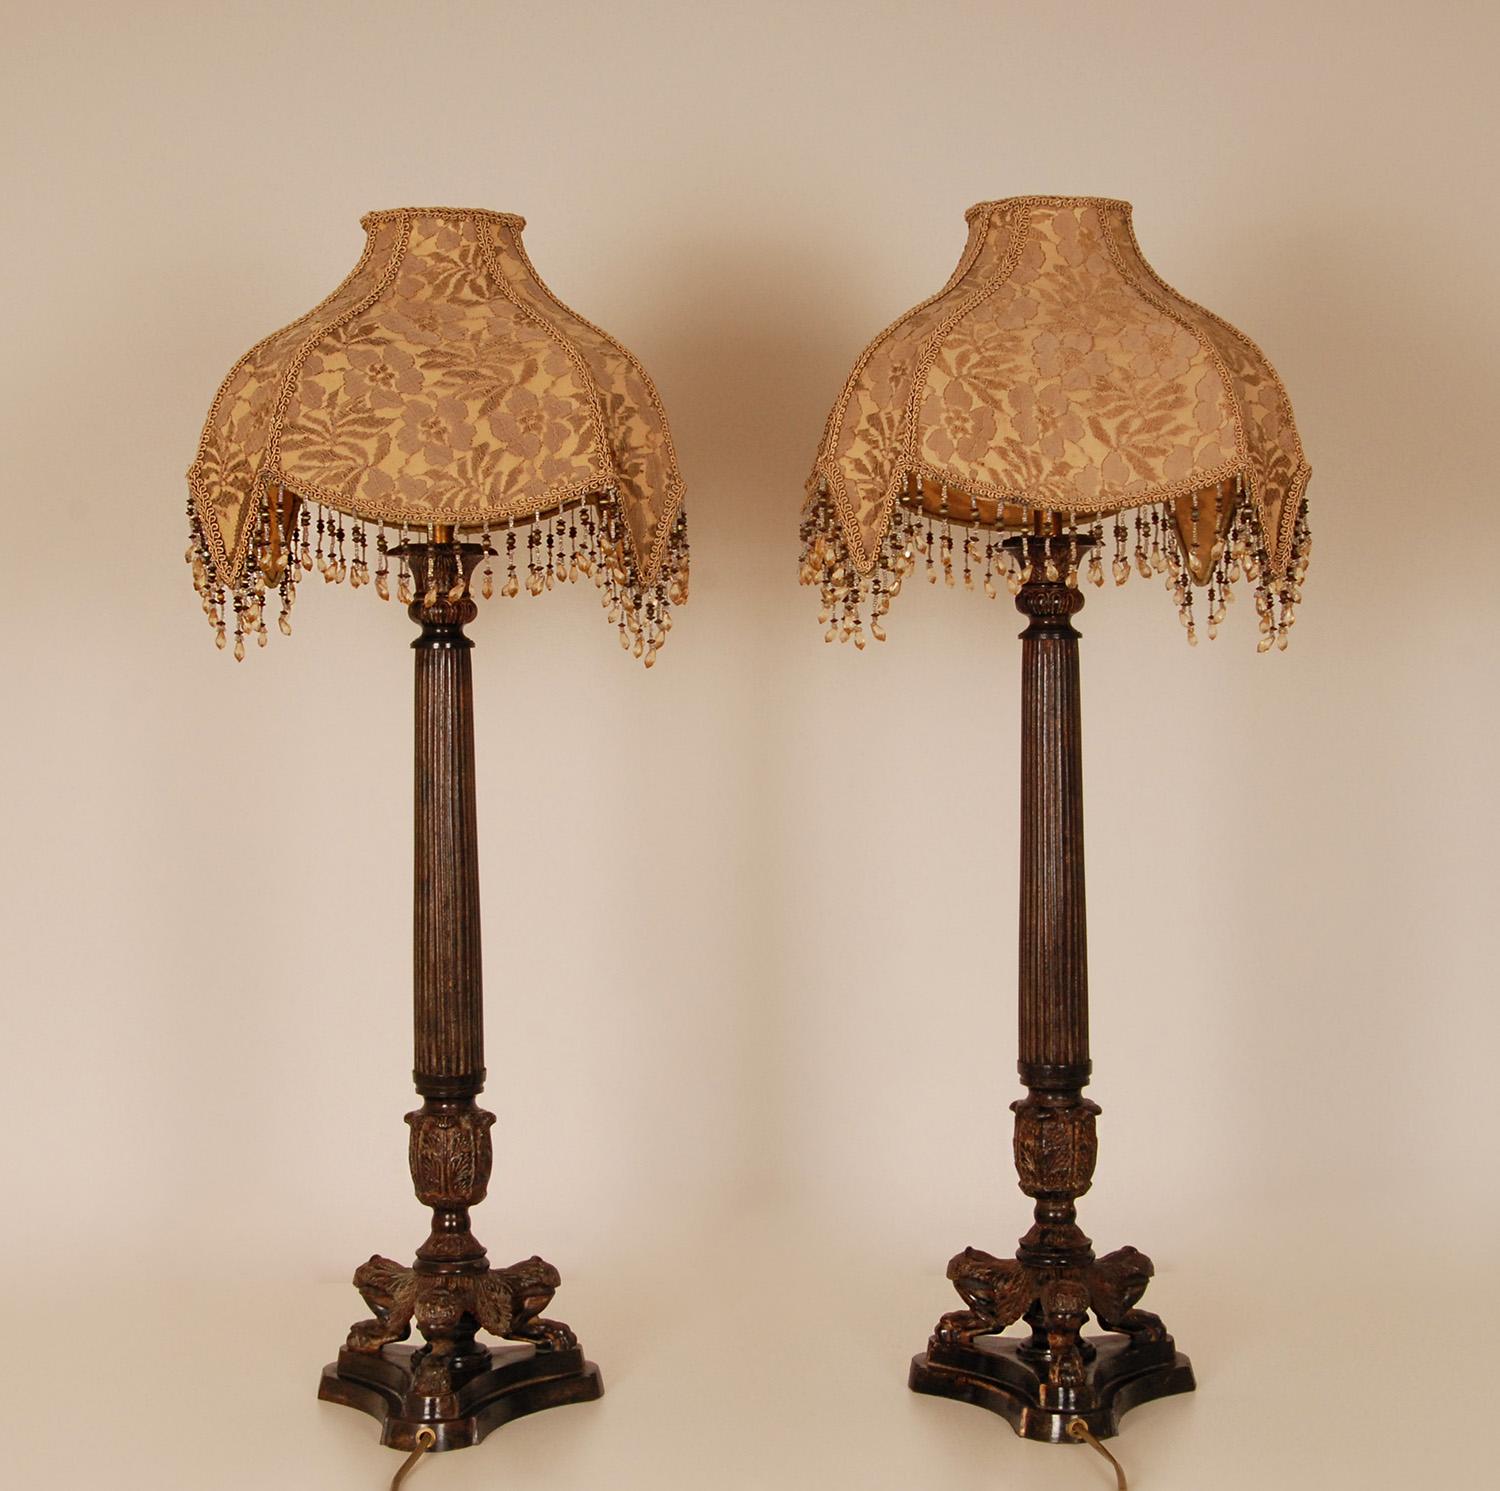 Antique French Empire Napoleonic Table Lamps Lion Paws Cast Iron a pair  4